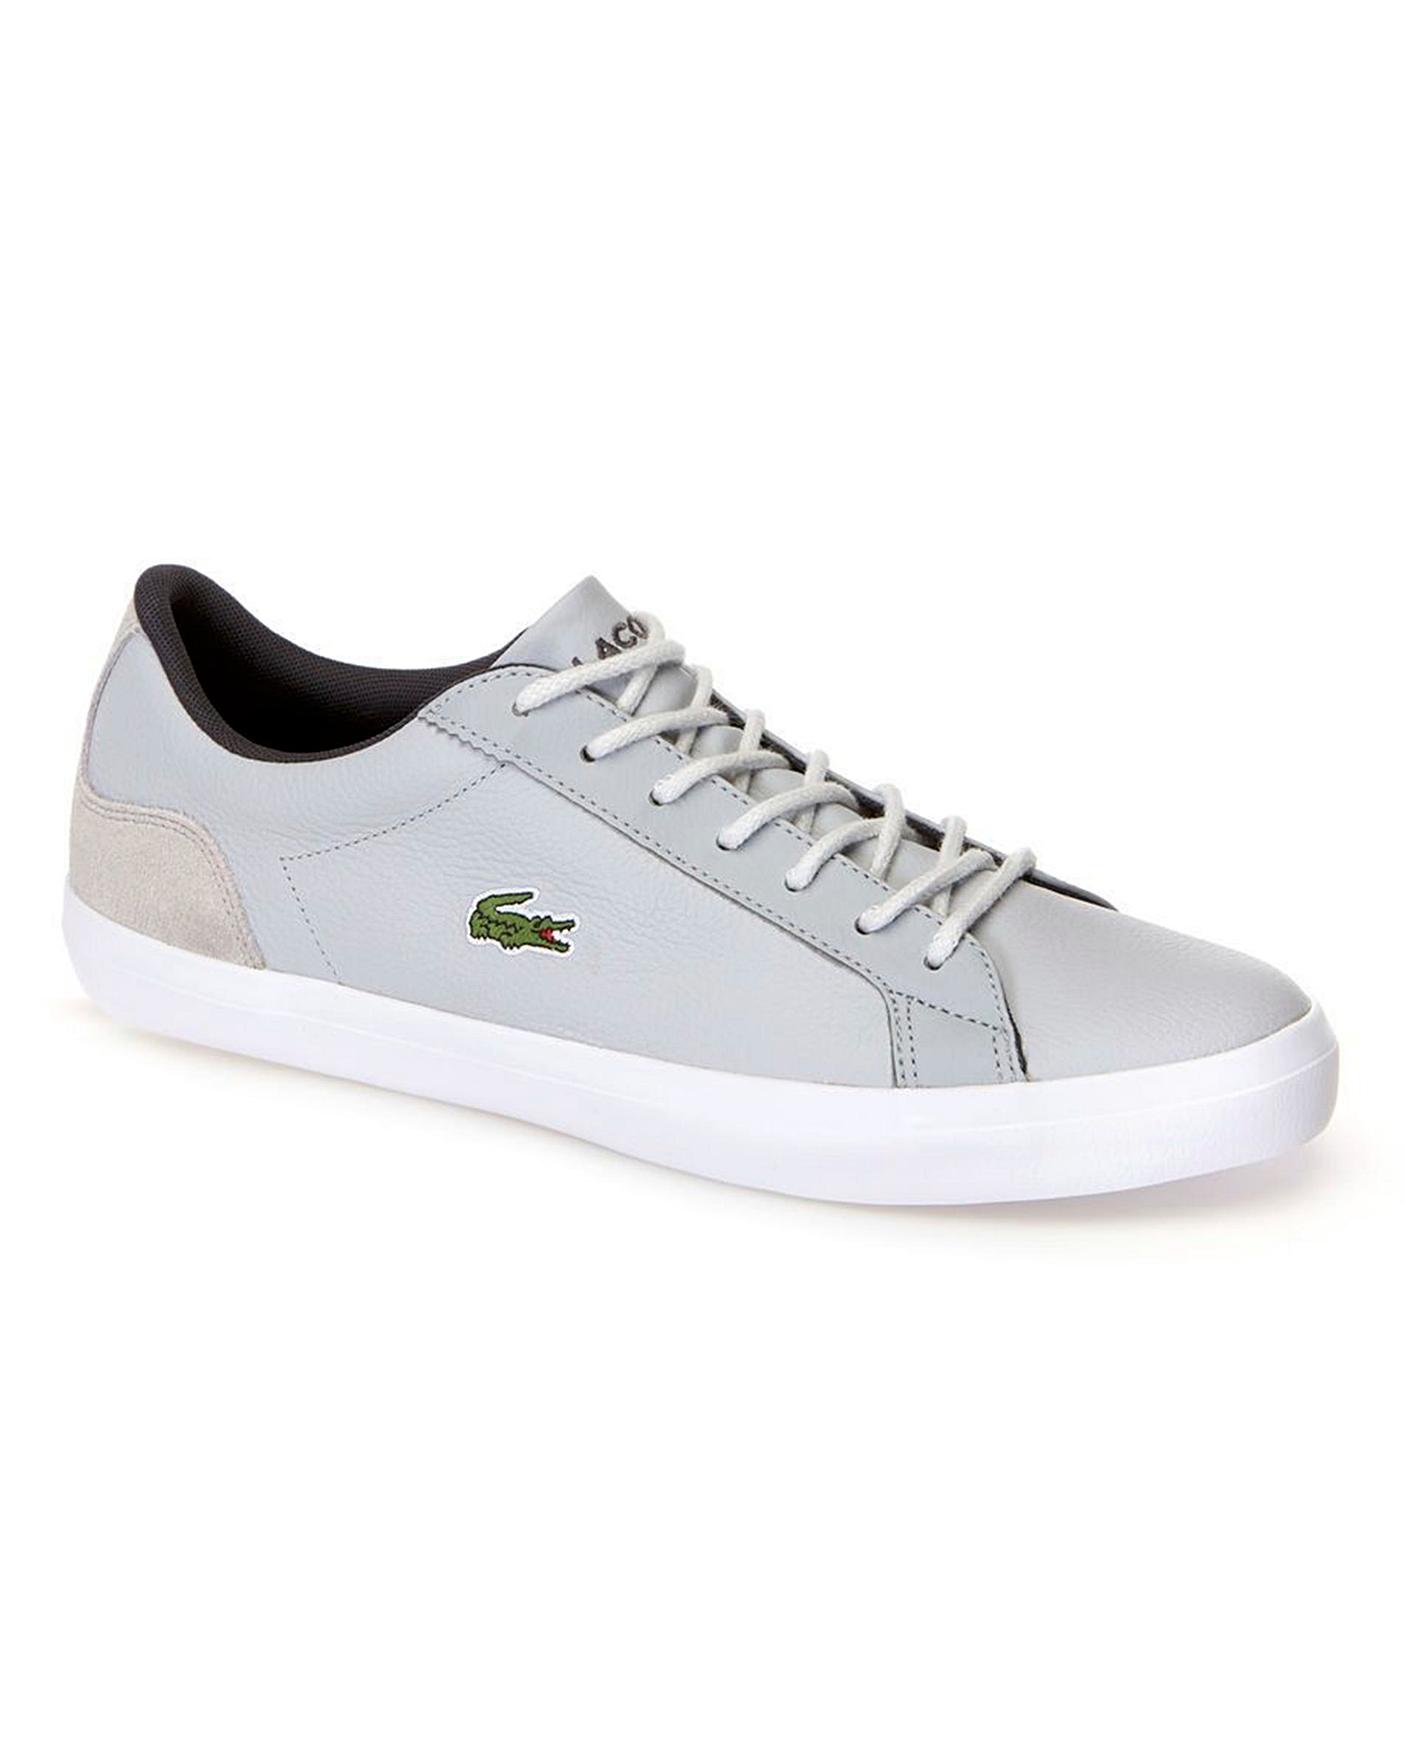 lacoste lerond trainers grey